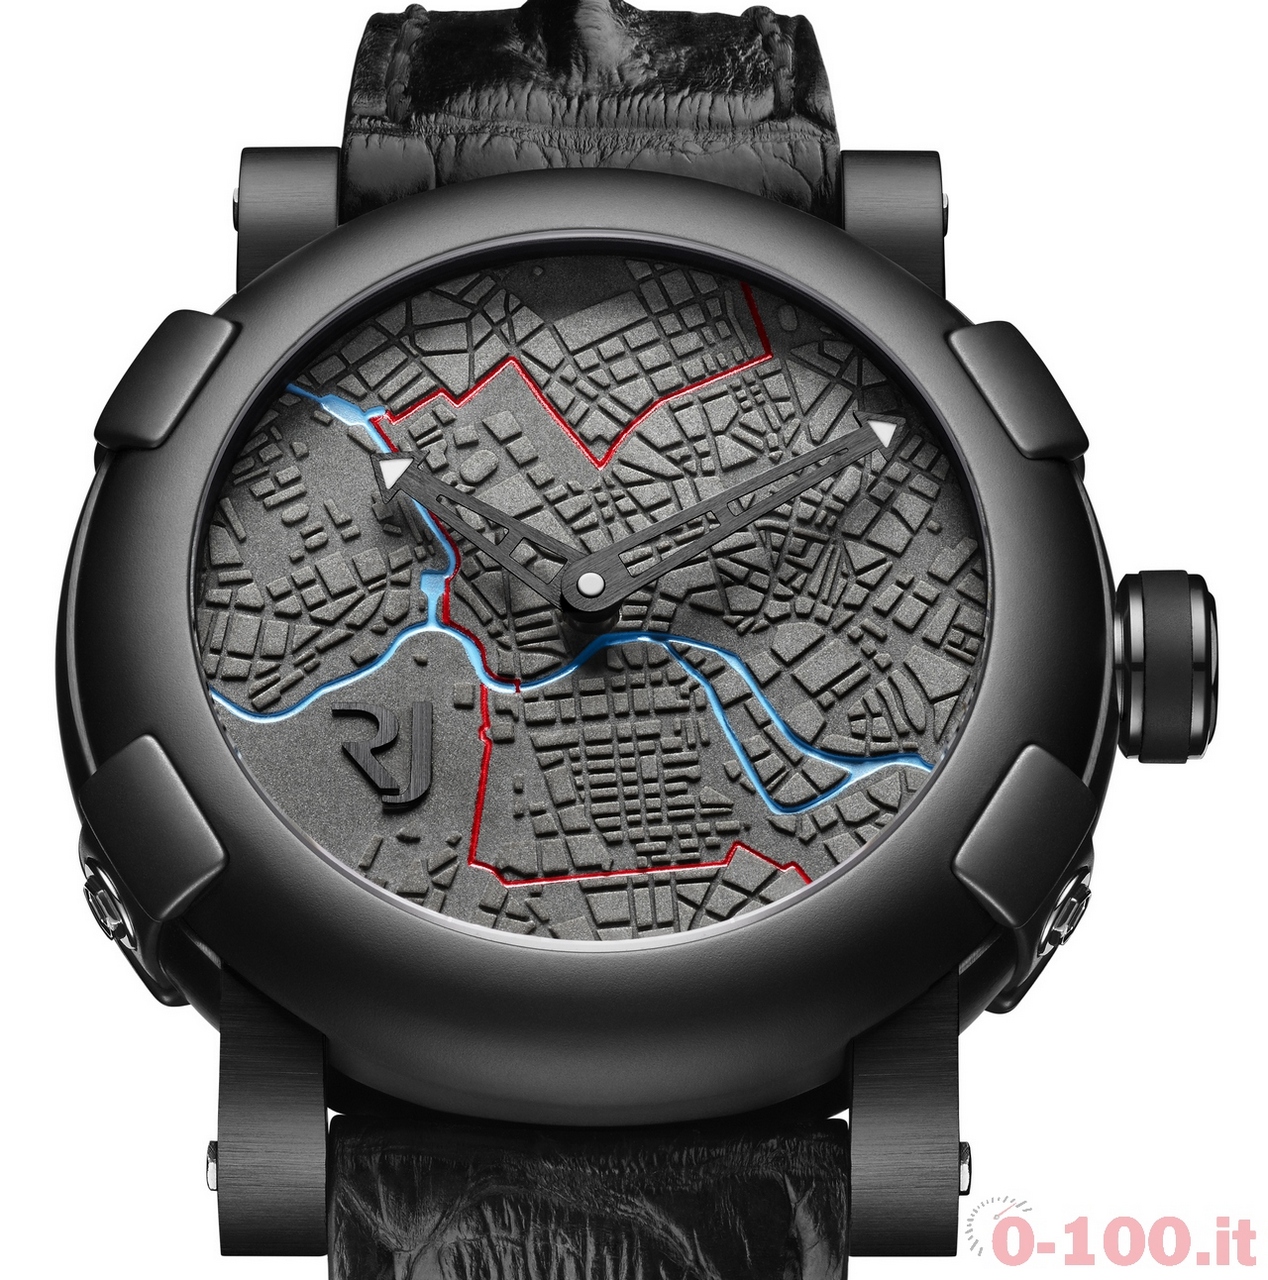 rj-romain-jerome-berlin-dna-east-side-gallery-limited-edition-0-100_1